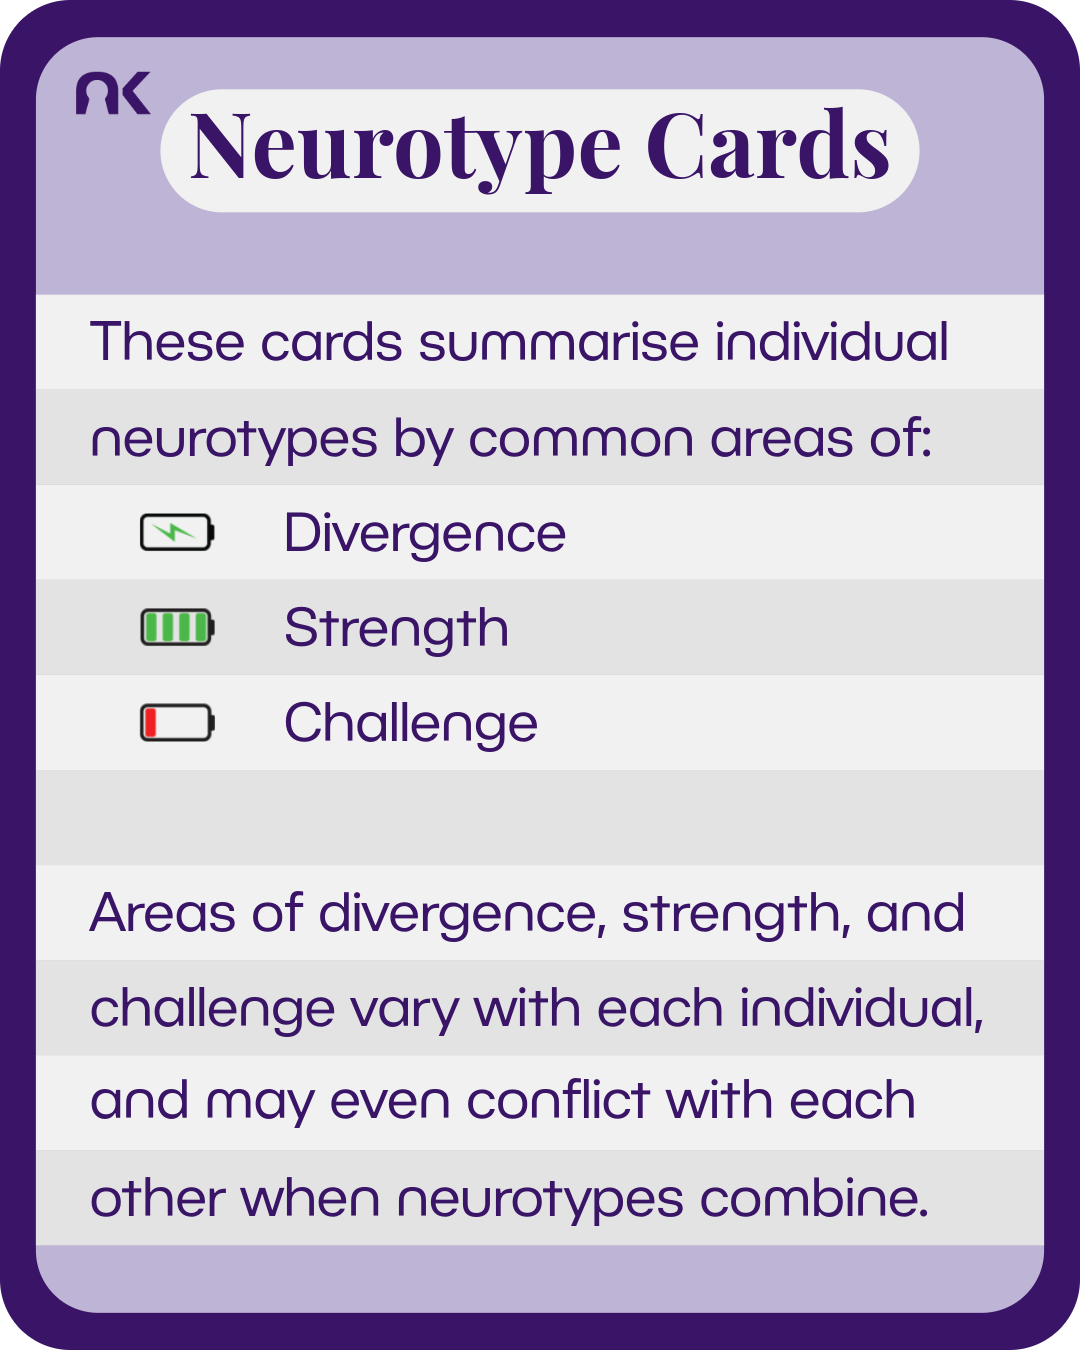 An information card made to look like the instruction card from a card game. Images of batteries are used to symbolise divergence (battery with an electric bolt), strength (battery with green bars to show full charge), challenge (battery with red bar to show low charge). Text says: "Neurotype cards. These cards summarise individual neurotypes by common areas of: divergence, strength, challenge. Areas of divergence, strength, and challenge vary with each individual, and may even conflict with each other when neurotypes combine."